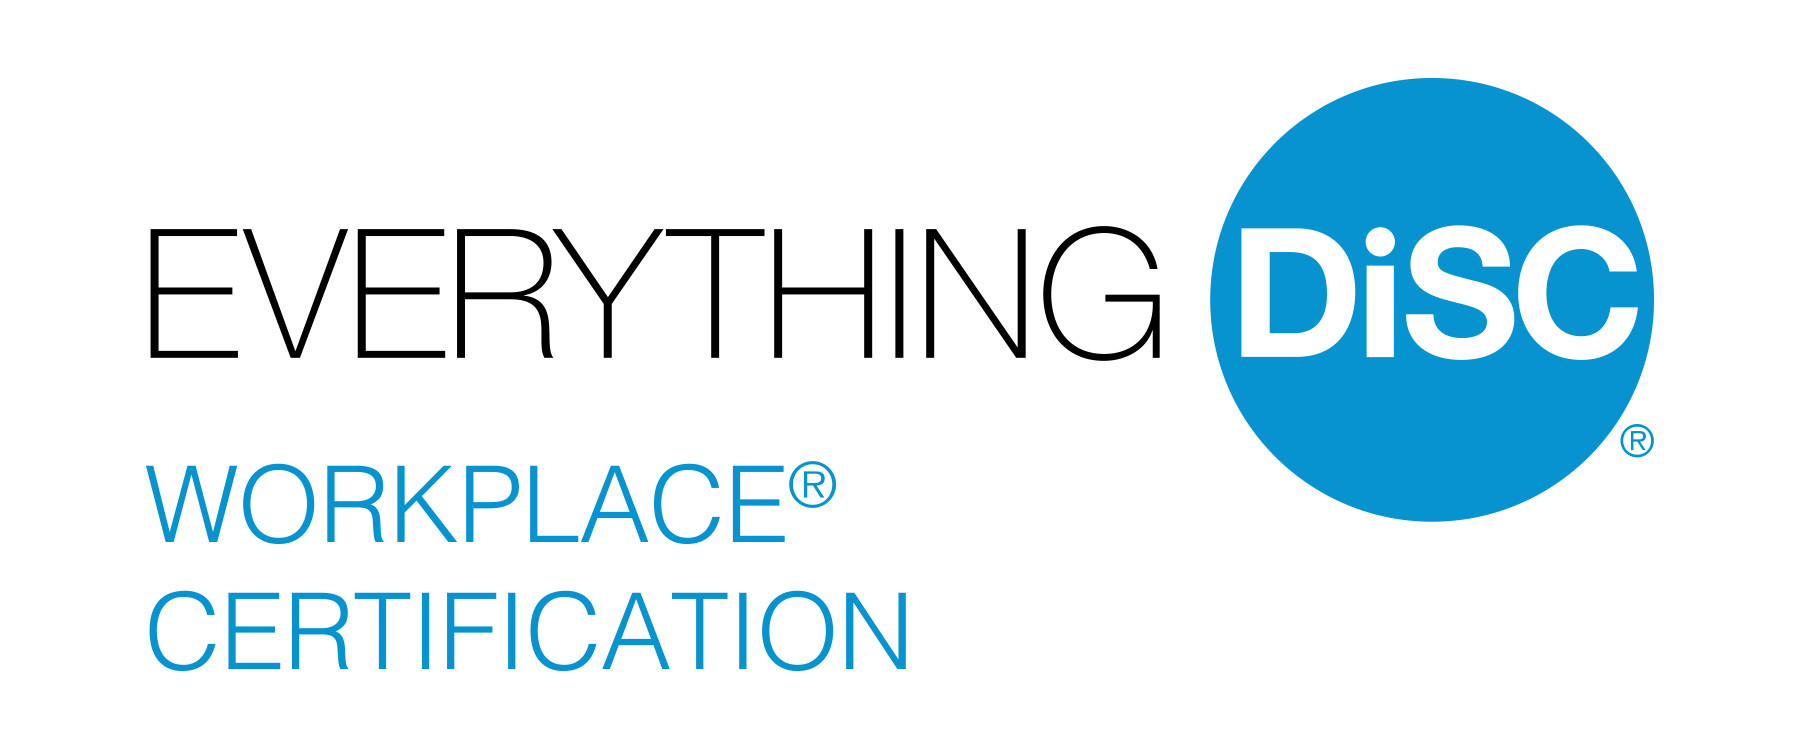 Everything DiSC certification